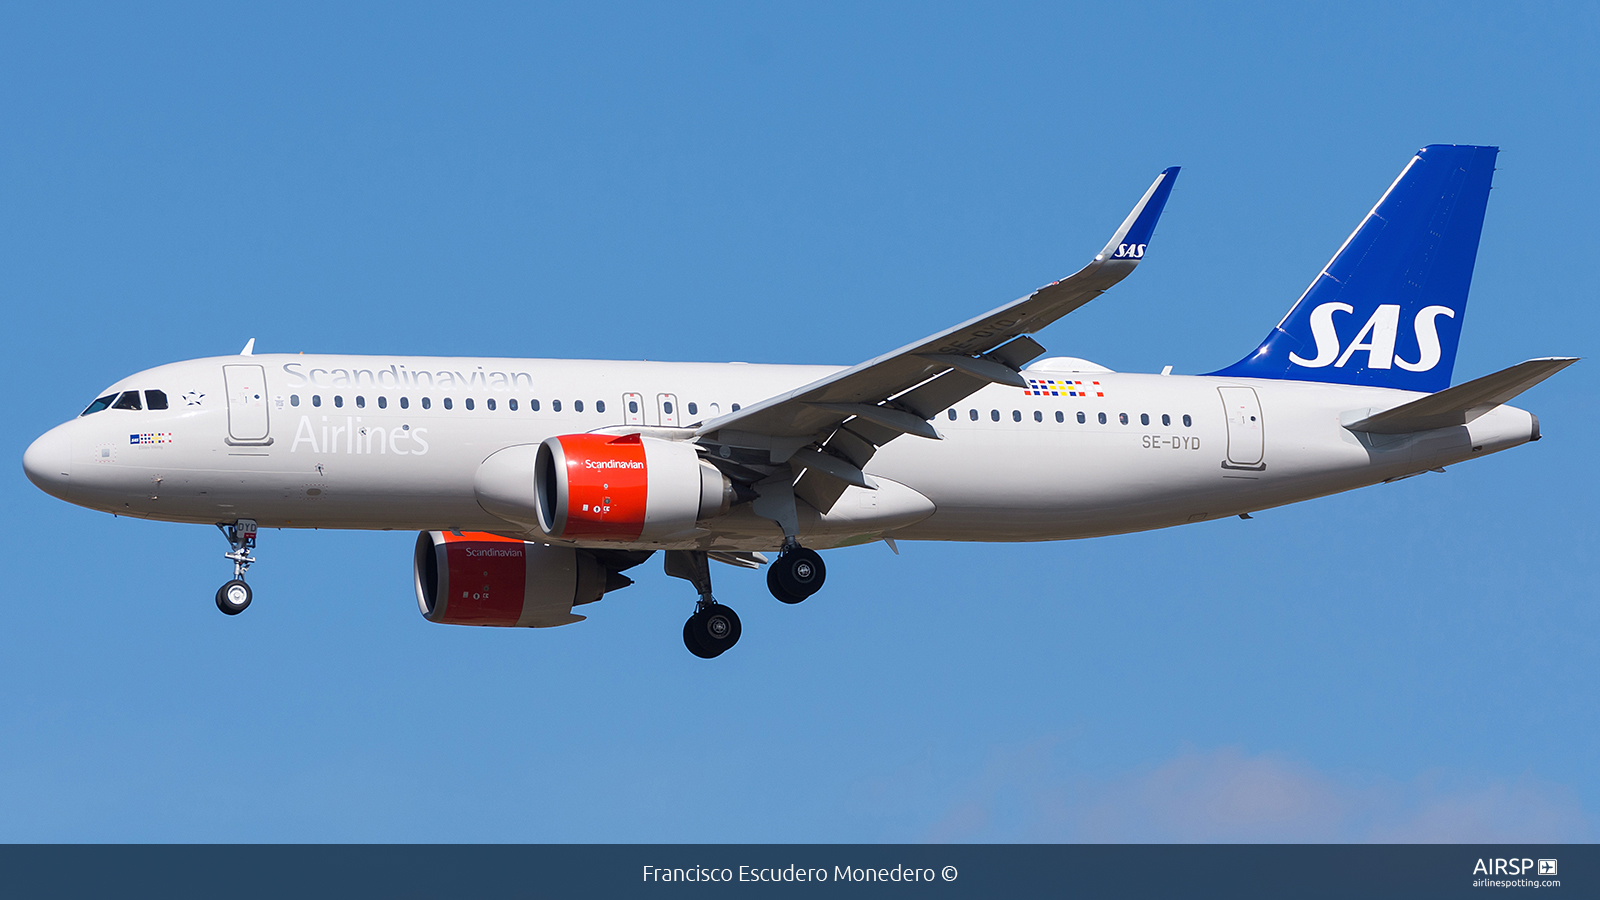 SAS Scandinavian Airlines  Airbus A320neo  SE-DYD